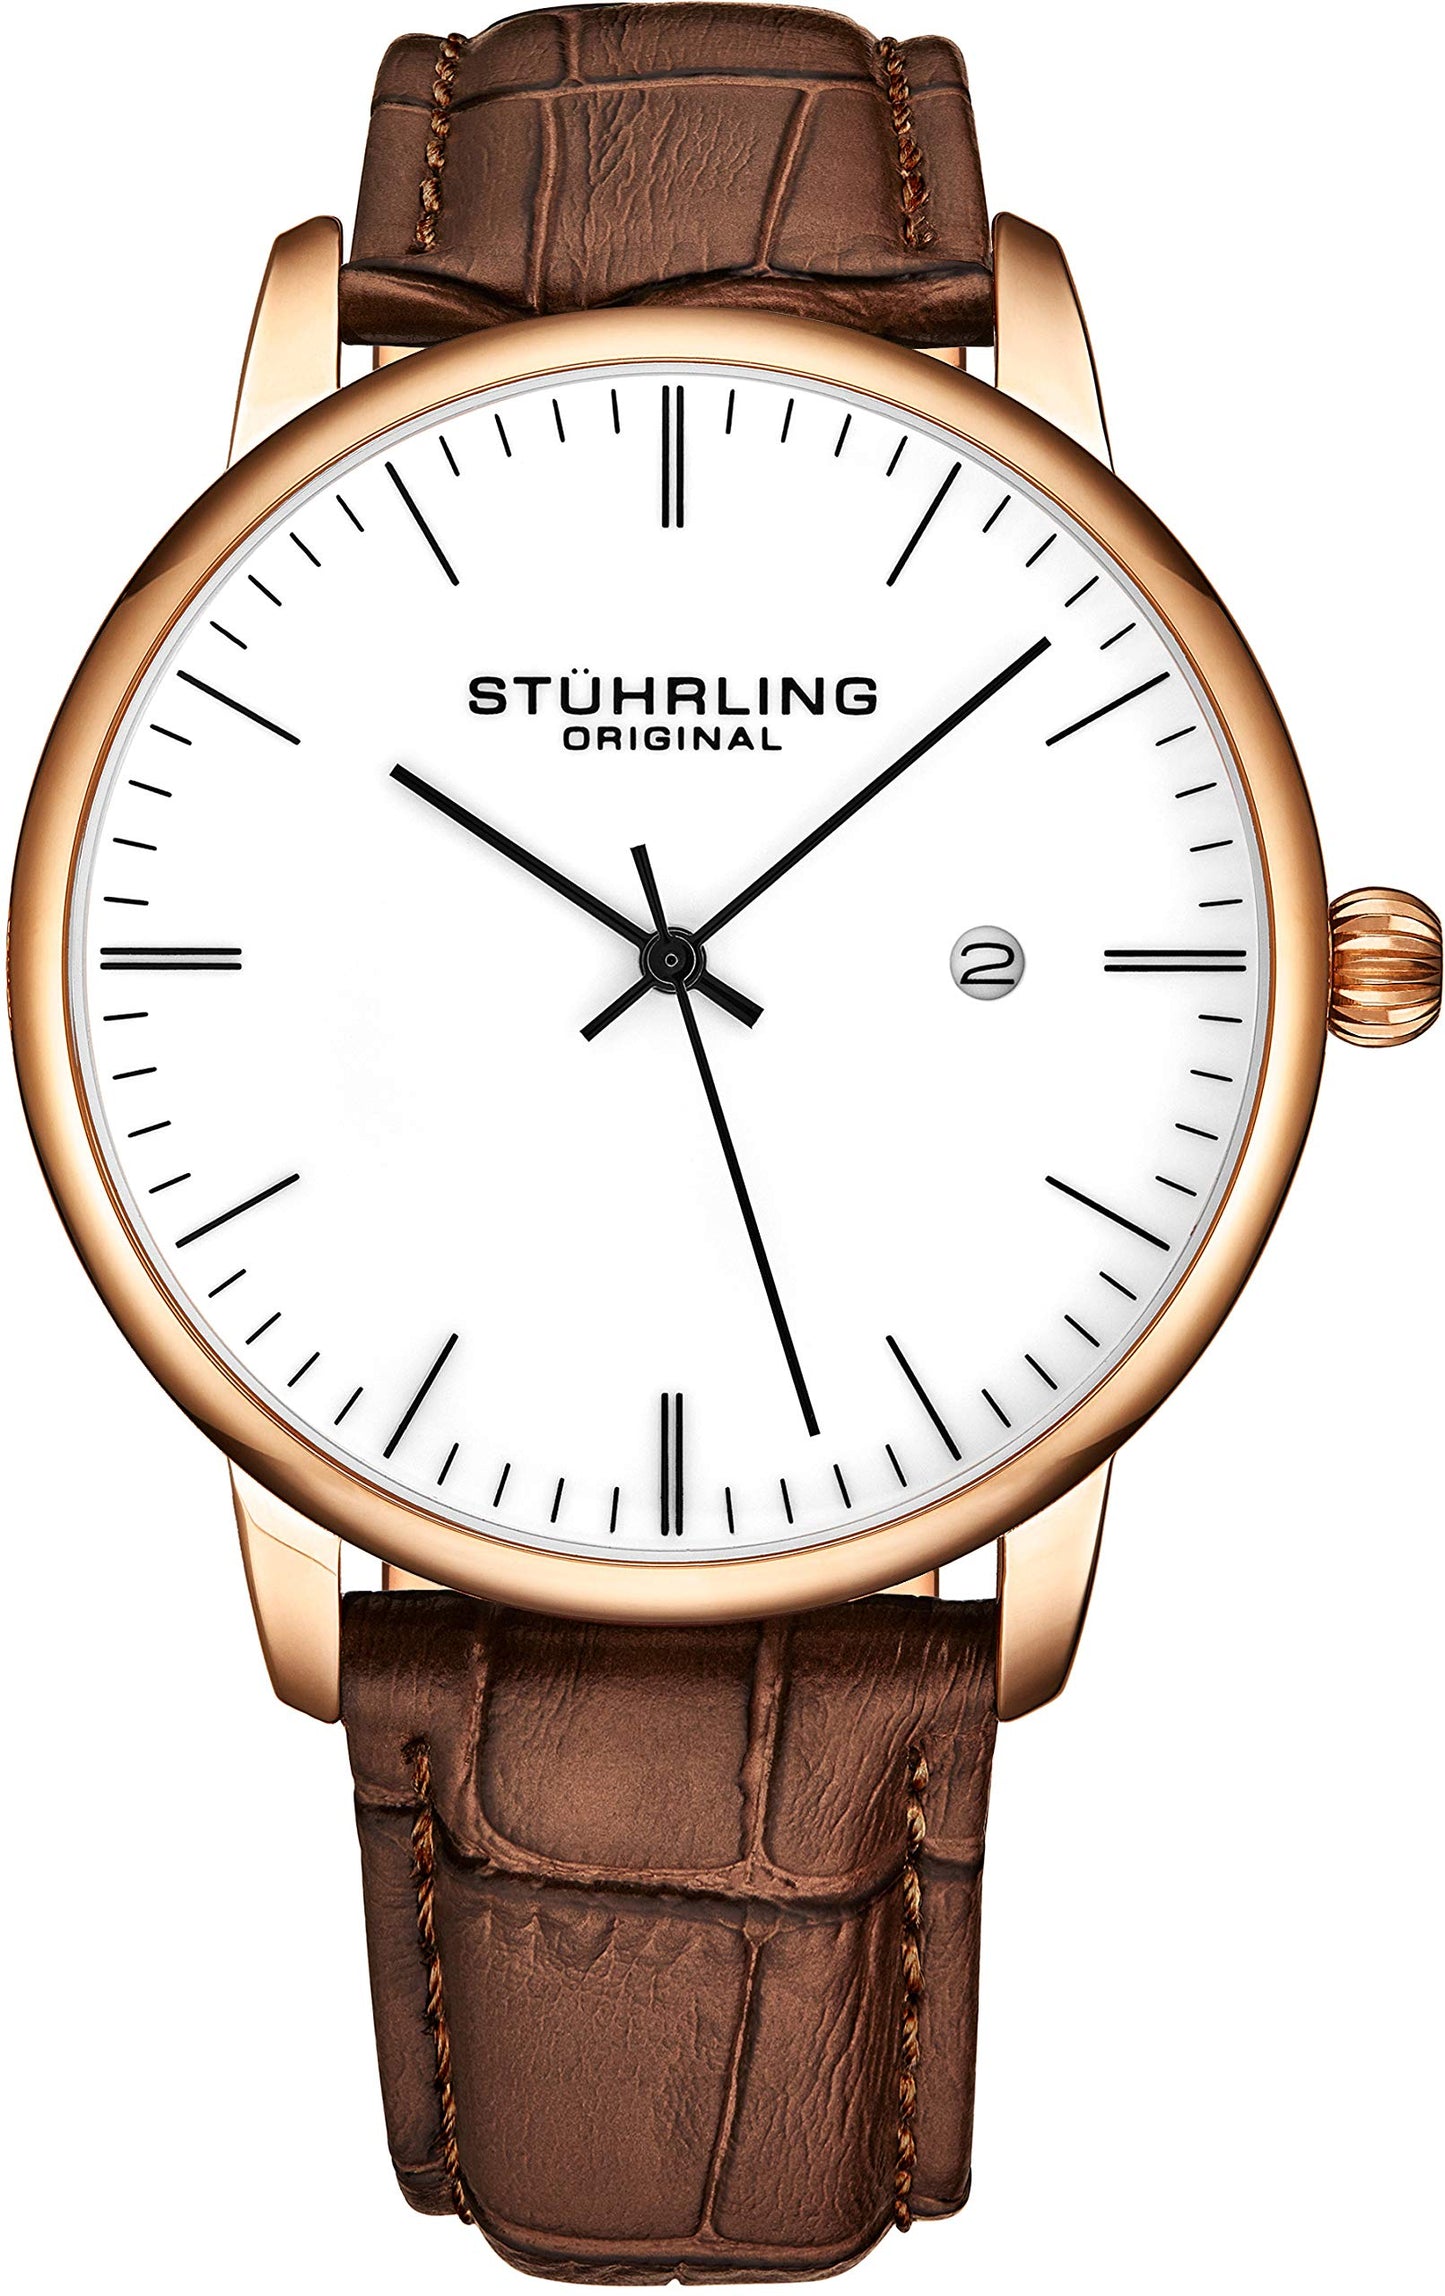 Stuhrling Original Mens Watch Calfskin Leather Strap - Dress + Casual Design - Analog Watch Dial with Date, 3997Z Watches for Men Collection (Rose Gold White)